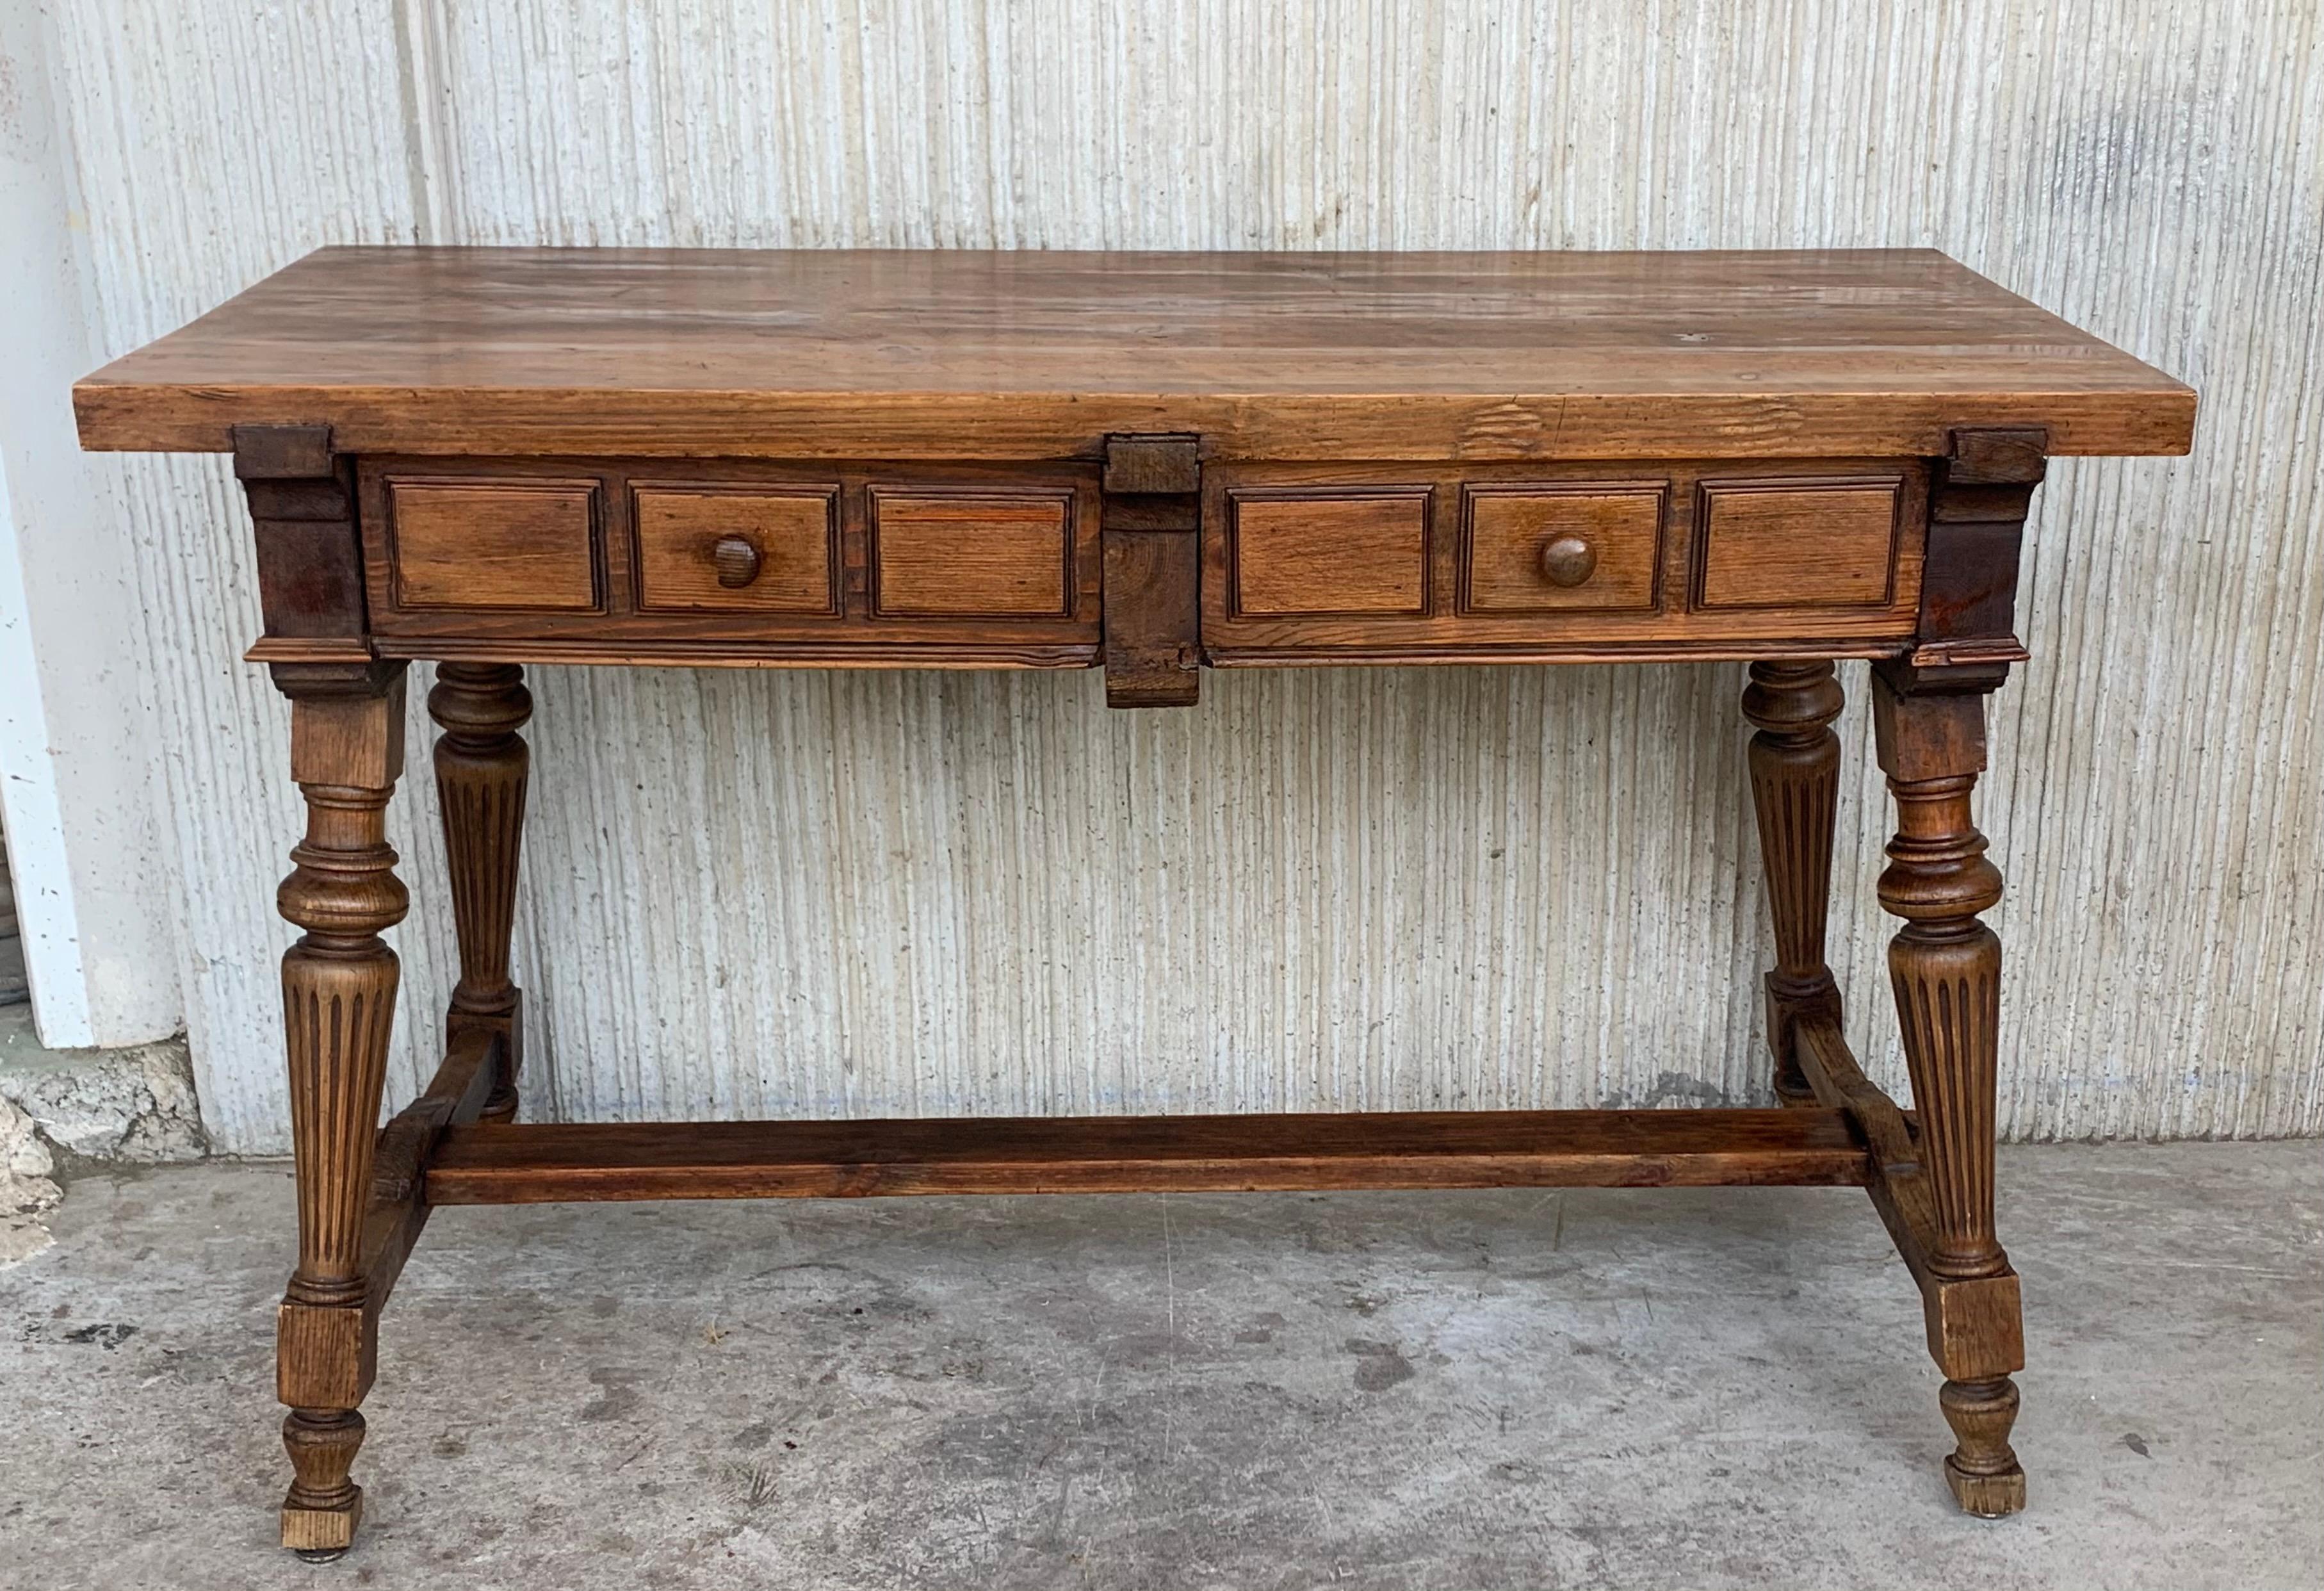 An 19th century Spanish baroque desk, or writing table made of solid oak with fluted shaped legs joined by solid wood stretched. Two drawers with original iron drawer pulls and two false drawers in back. The top is made from a single plank of oak